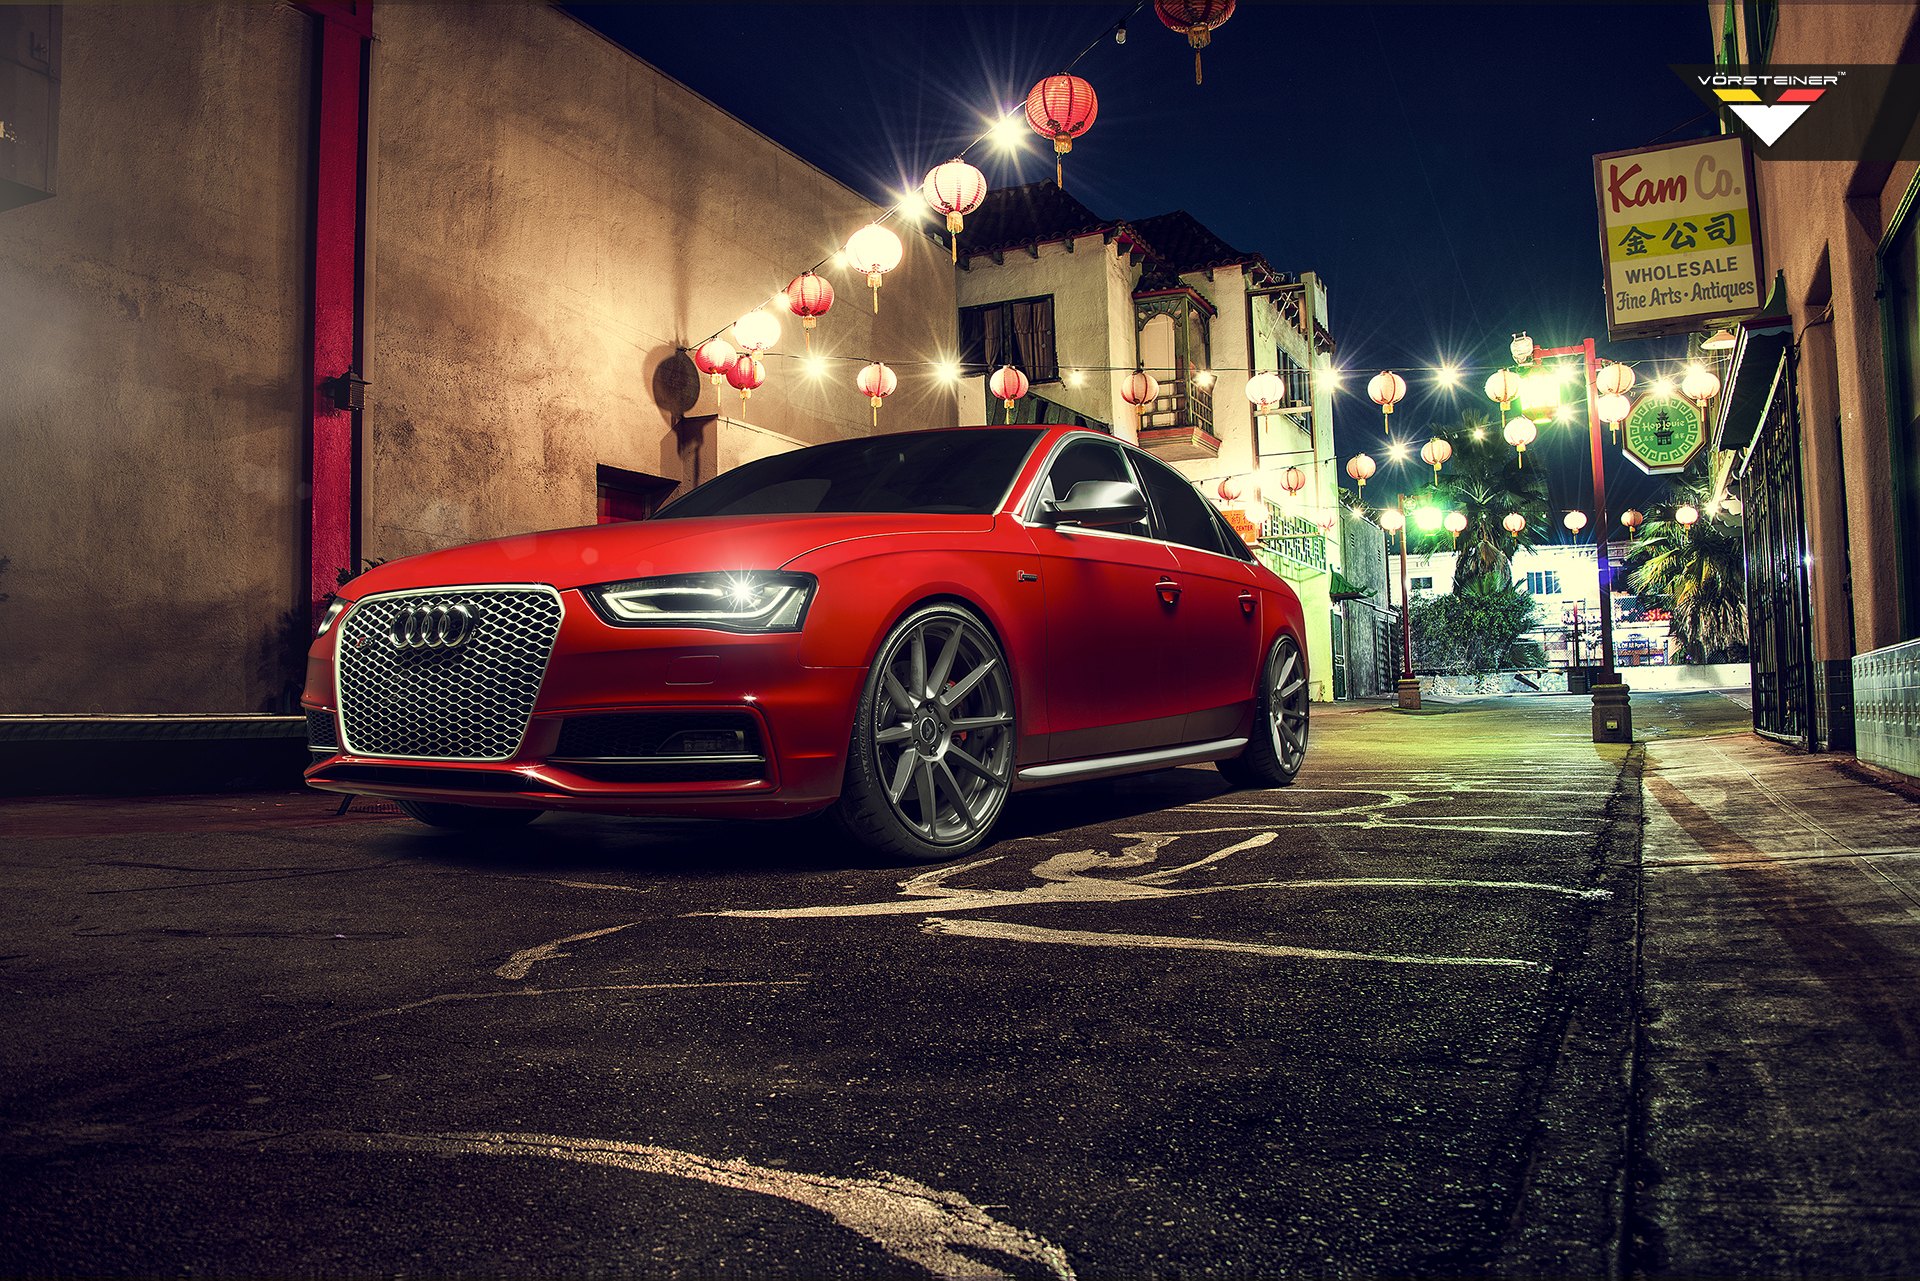 Red Audi S4 with Custom Chrome Grille - Photo by Vorstiner